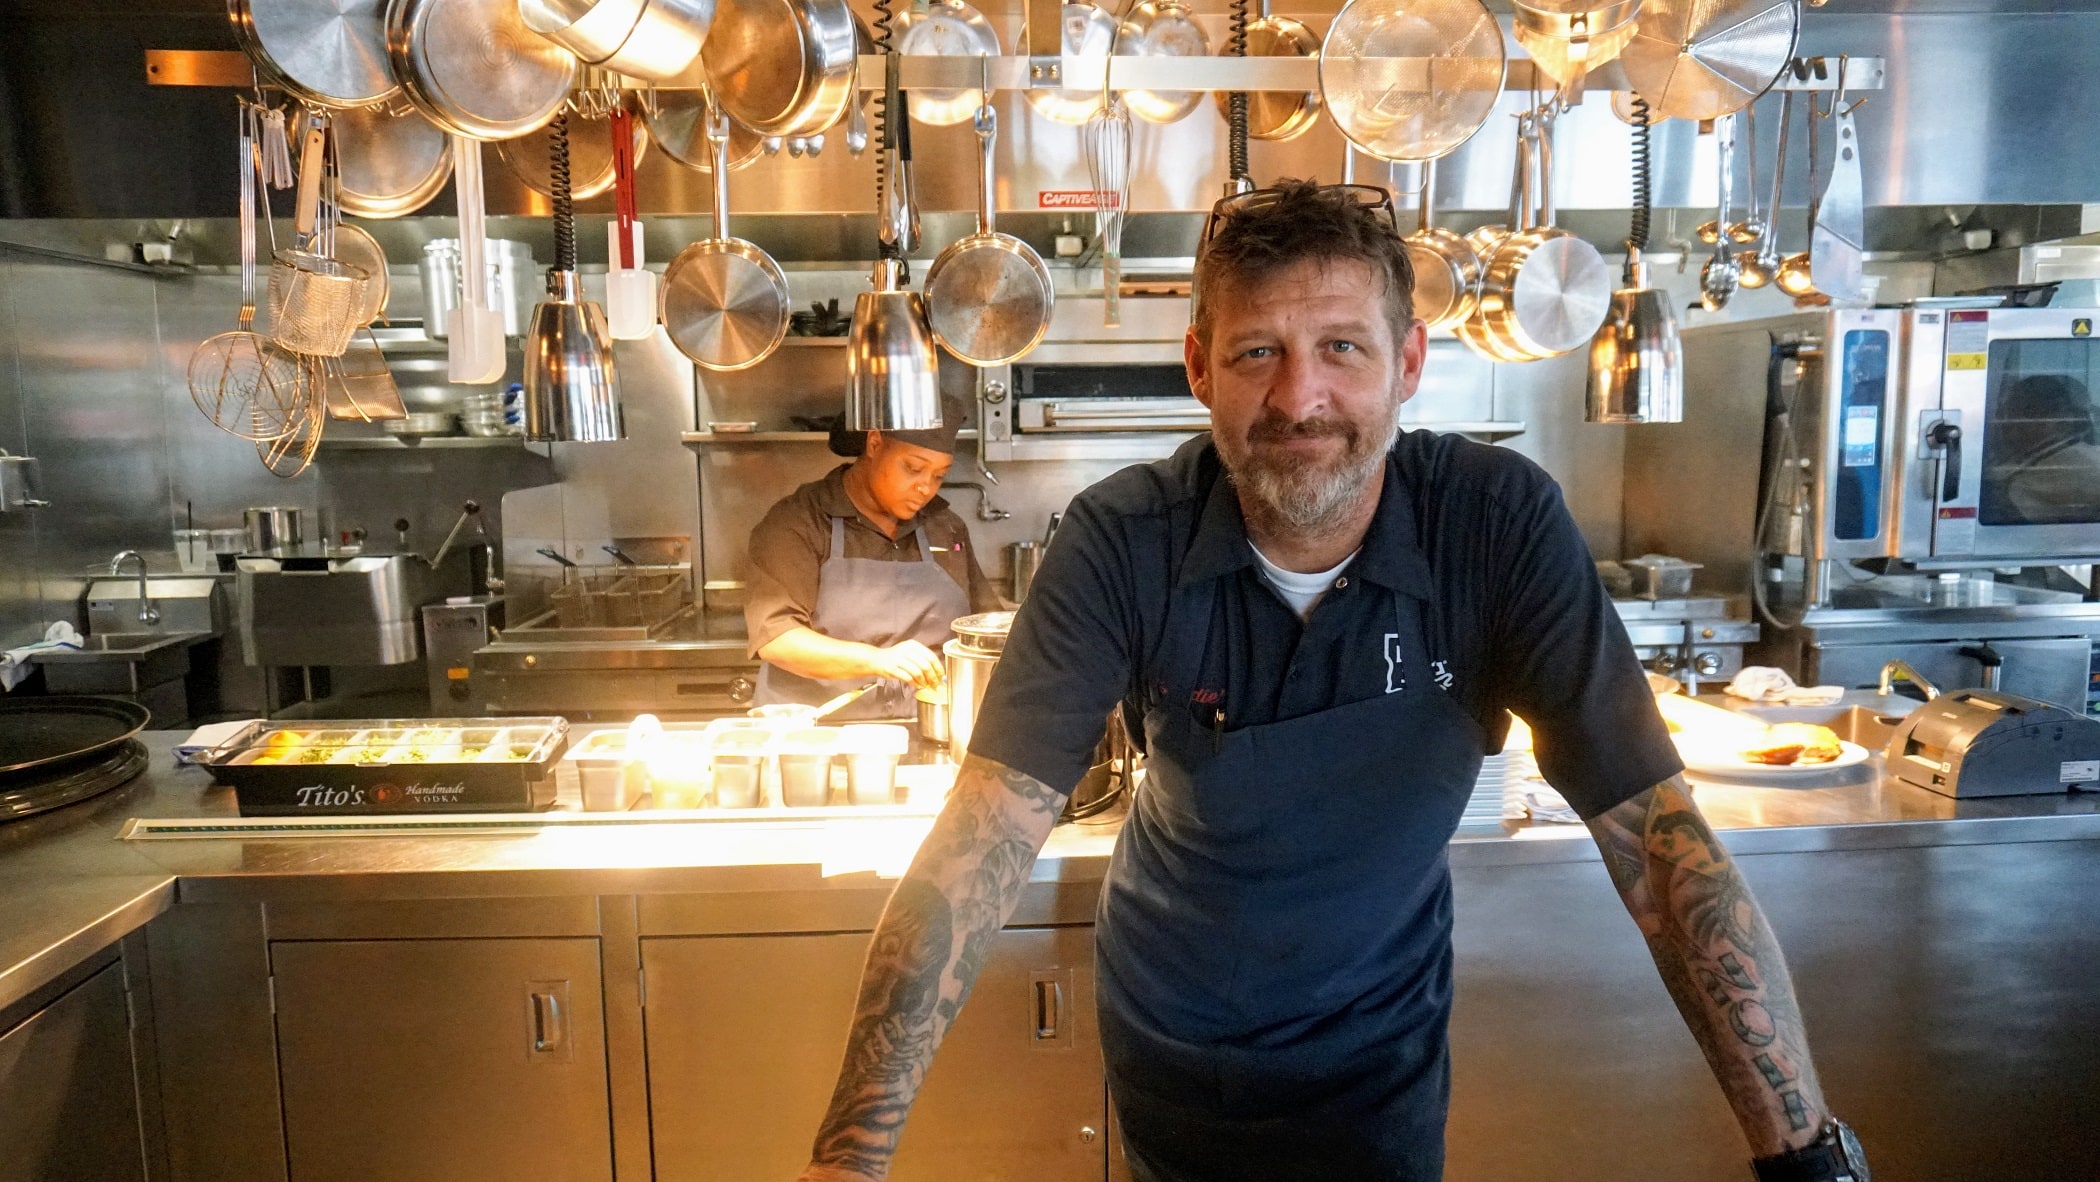 Chef Eric Cook, a combat veteran who served in the United States Marine Corp.